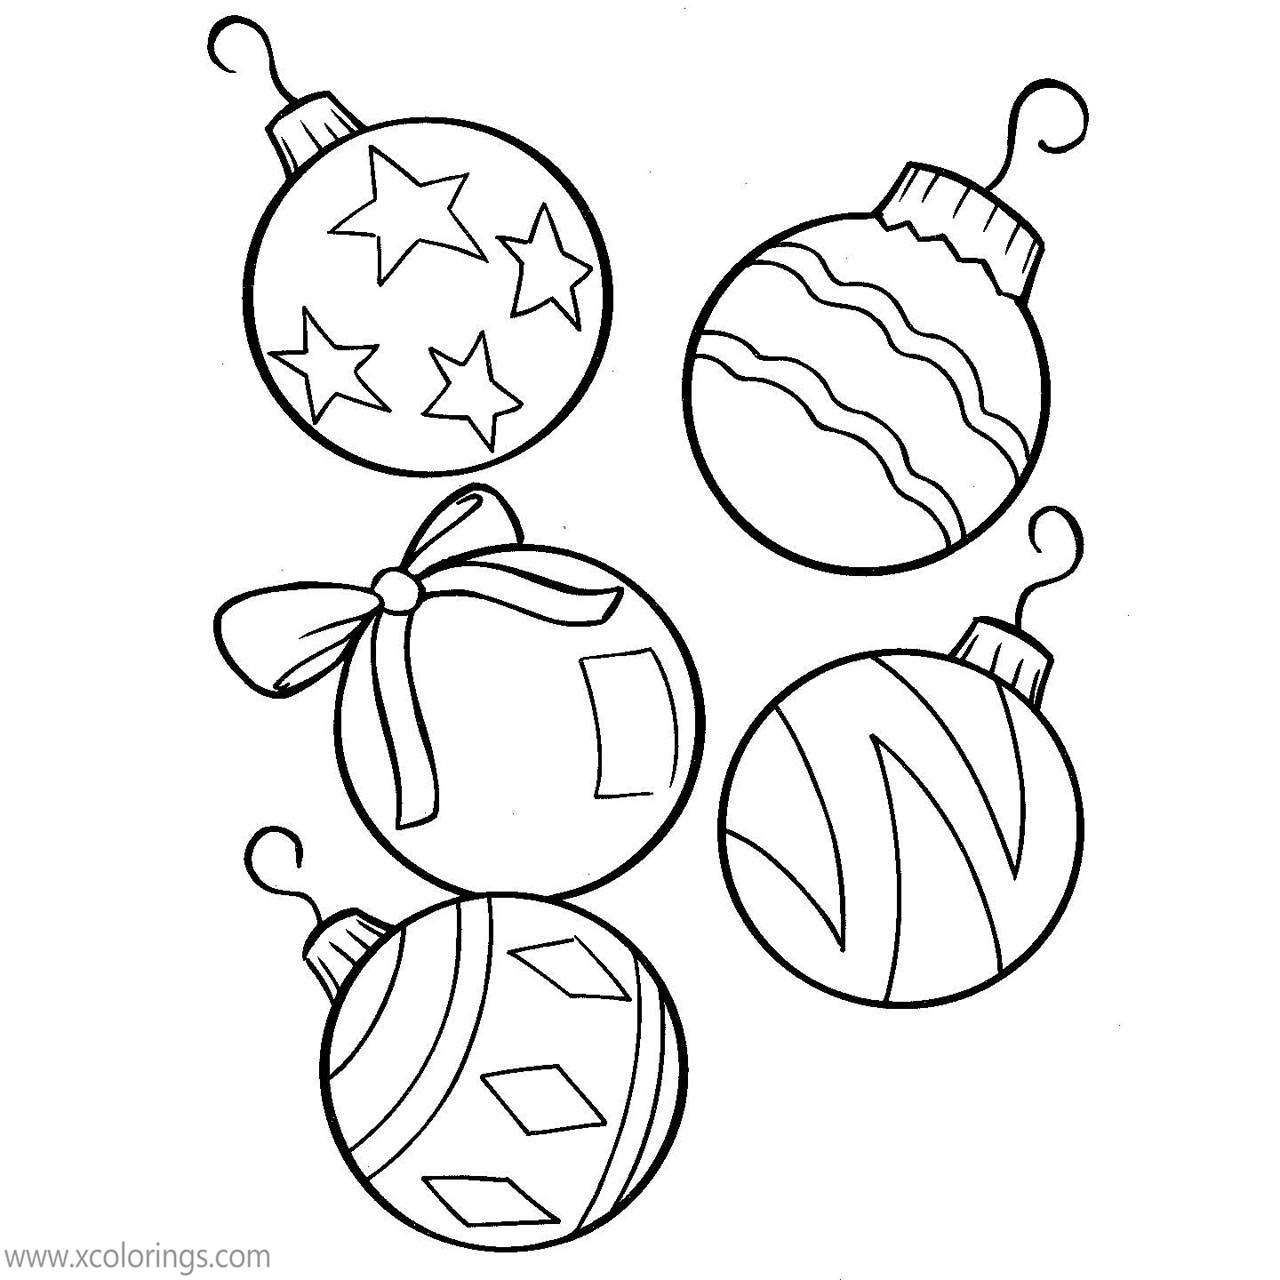 Free Five Christmas Ornaments Coloring Pages printable